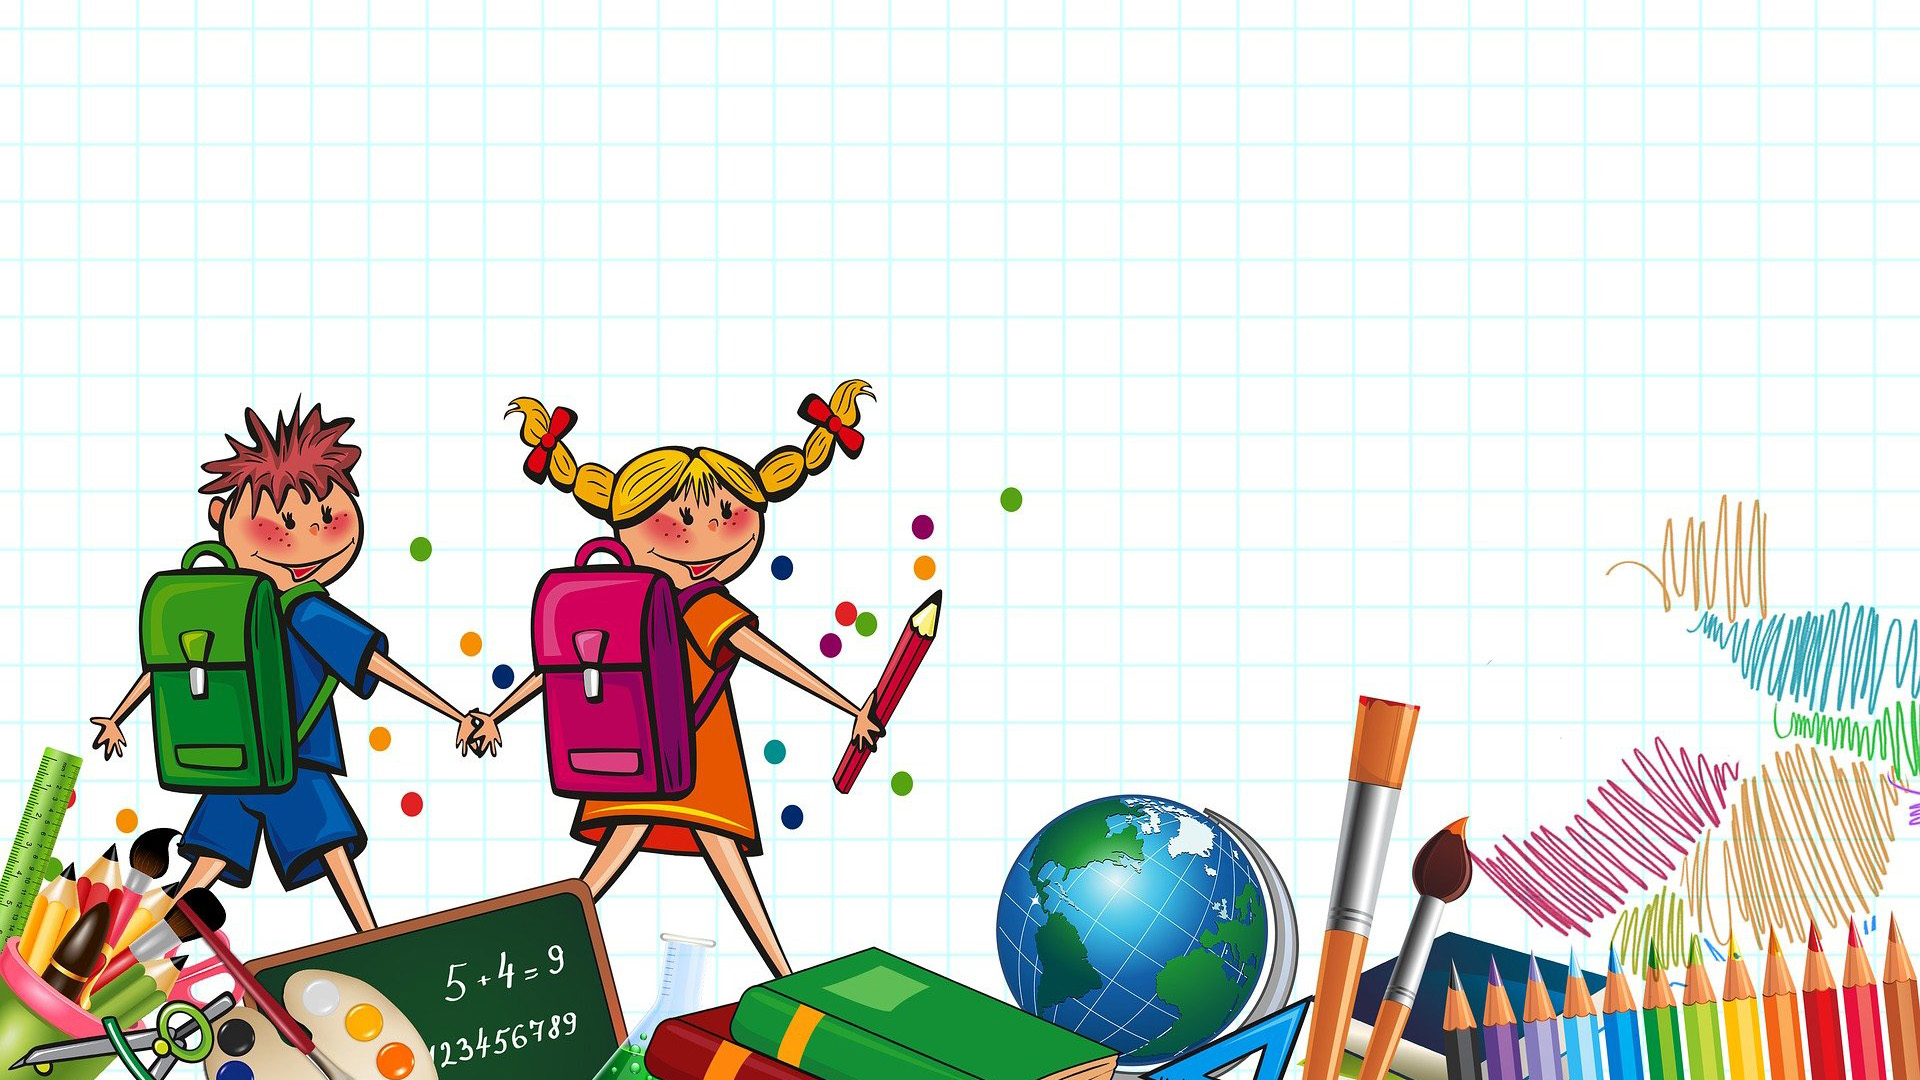 in this graphic there are 2 illustrated children holding hands and looking back at the screen each wearing backpacks. towards the bottom of the graphic theres a ruler, compass, chalkboard, beaker, books, globe,colored pencils, and a paintbrush.